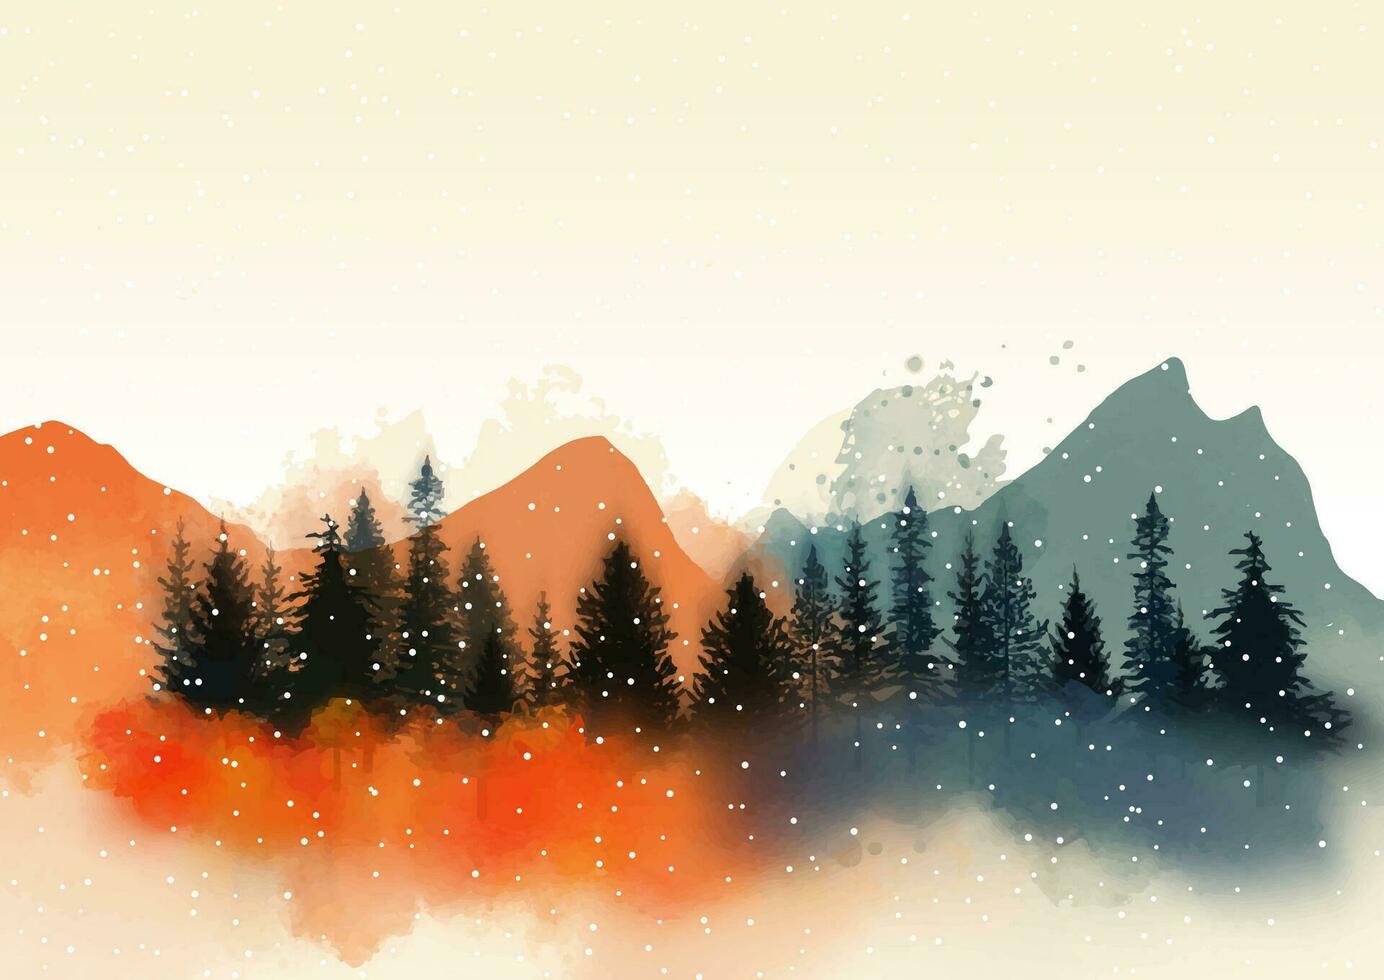 abstract watercolour winter landscape background vector